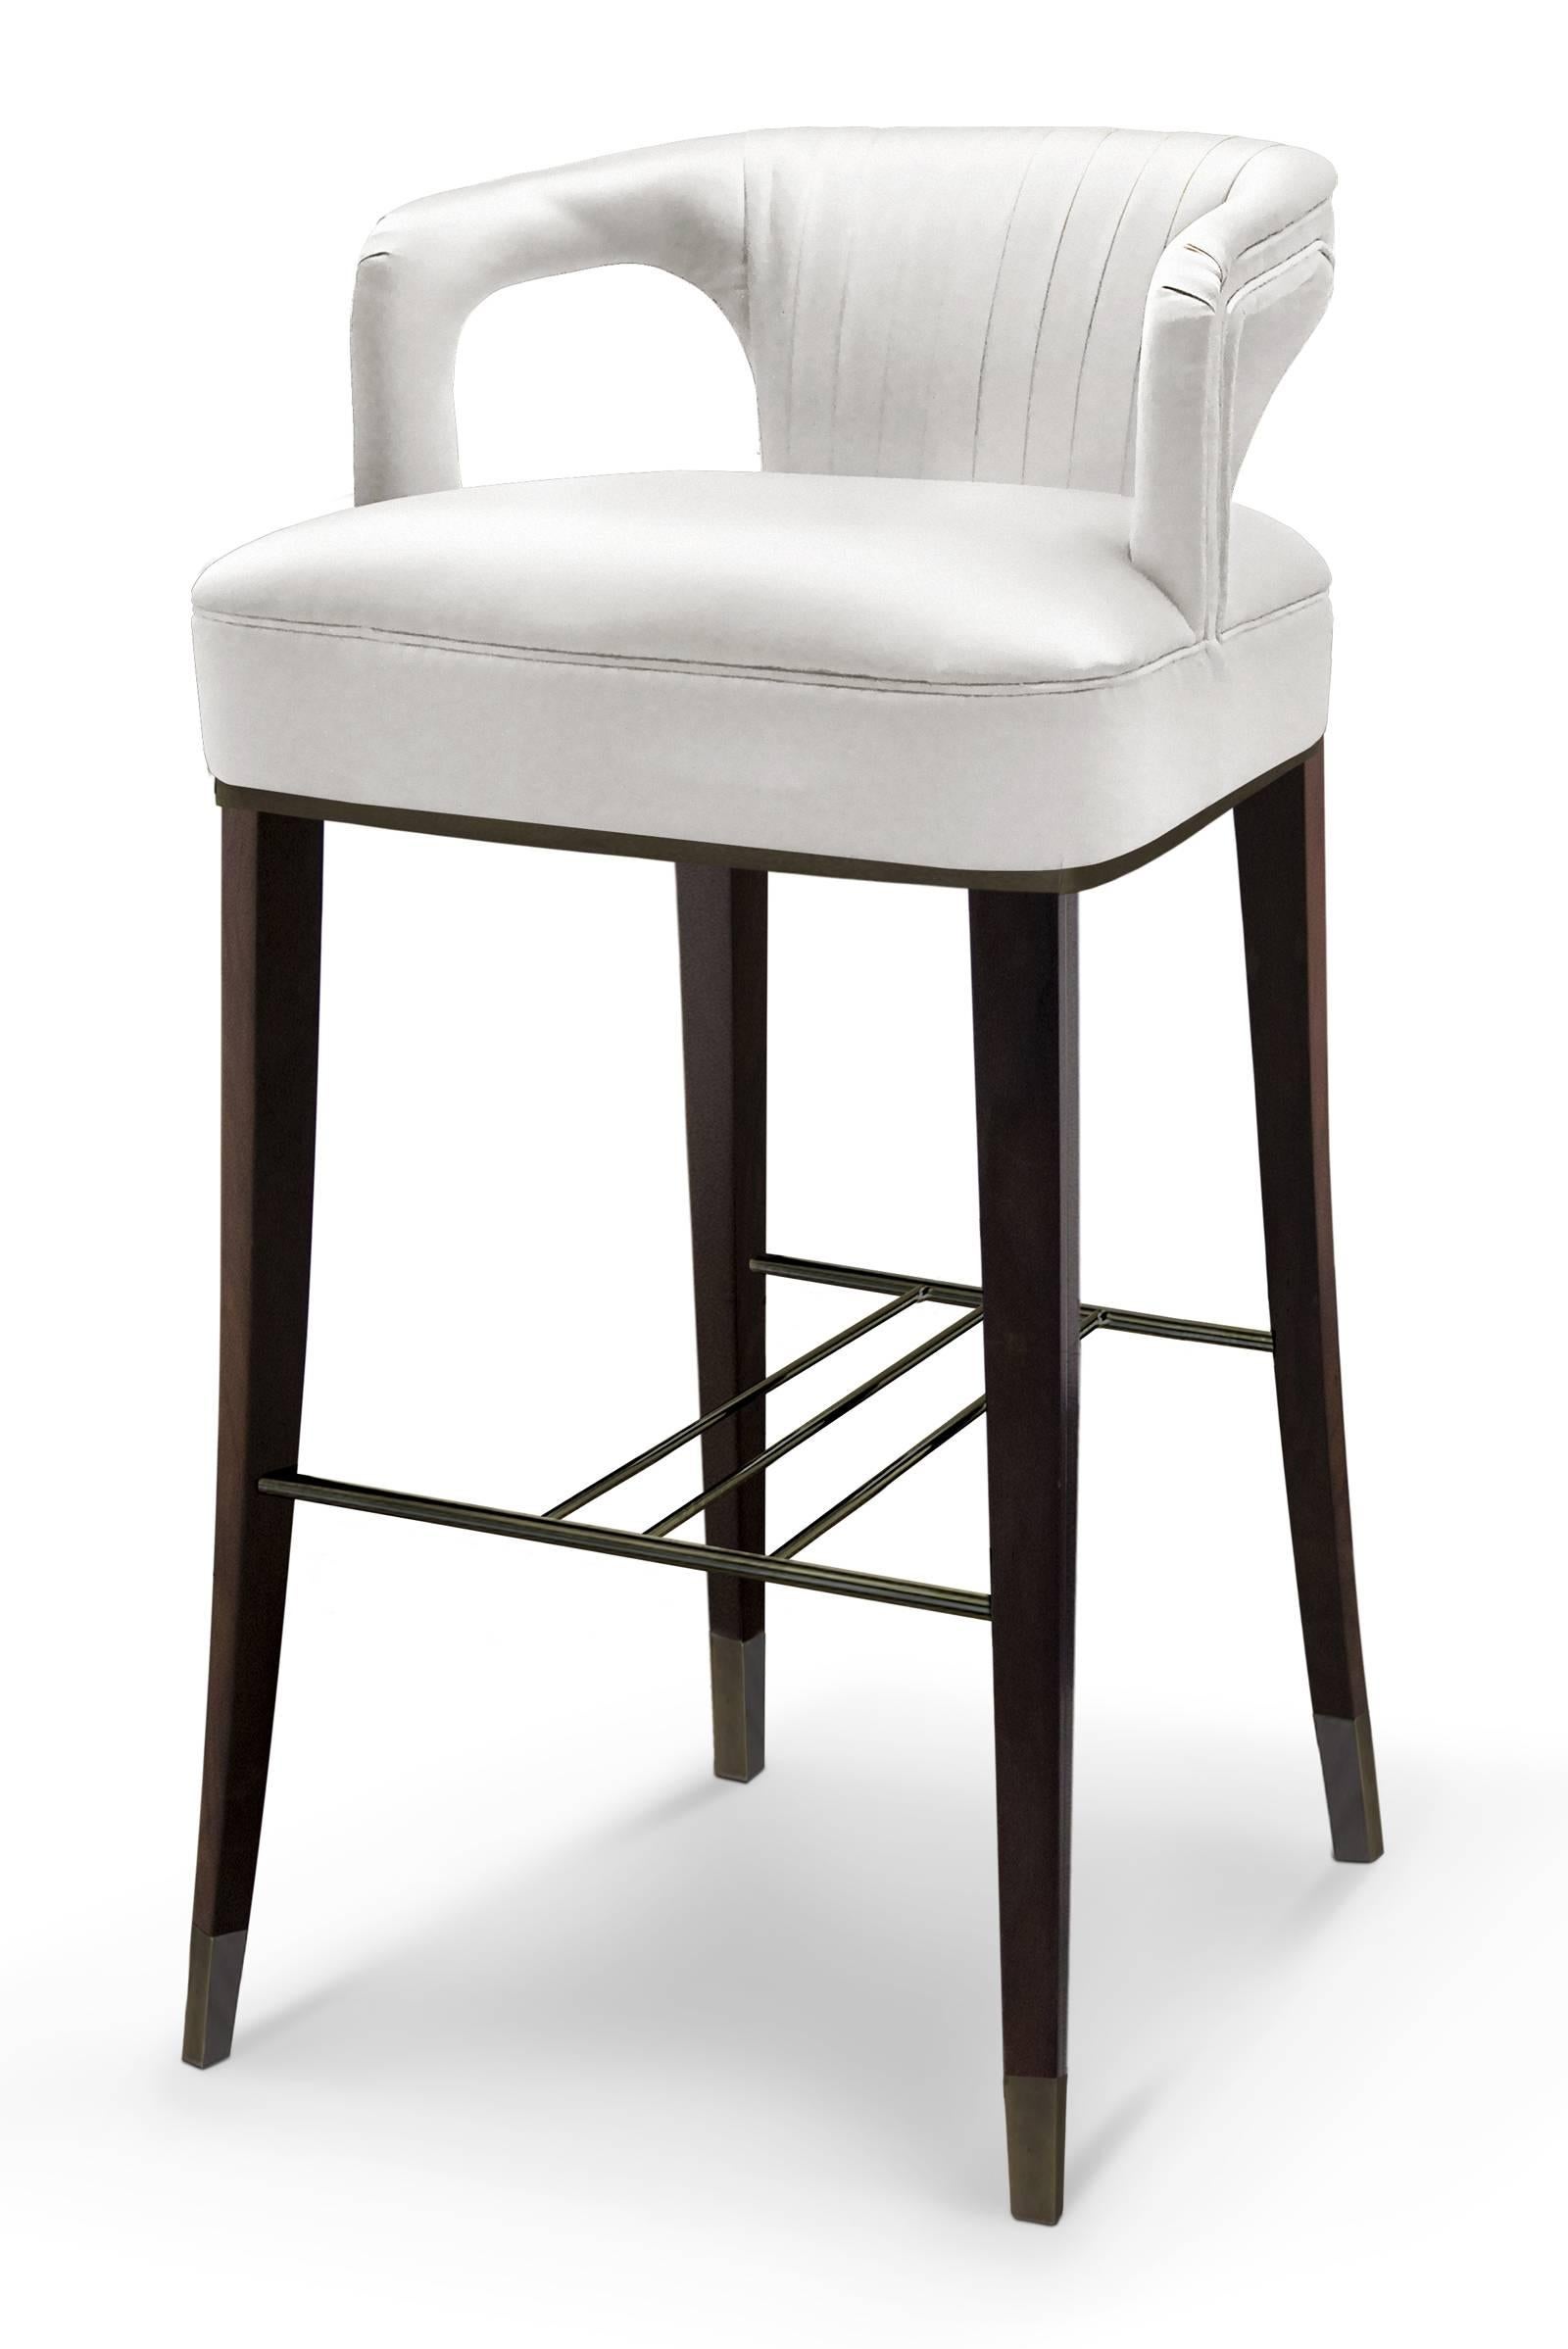 Bar stool Orka made with cotton satin fabric,
oak with walnut stain and aged brass details.
